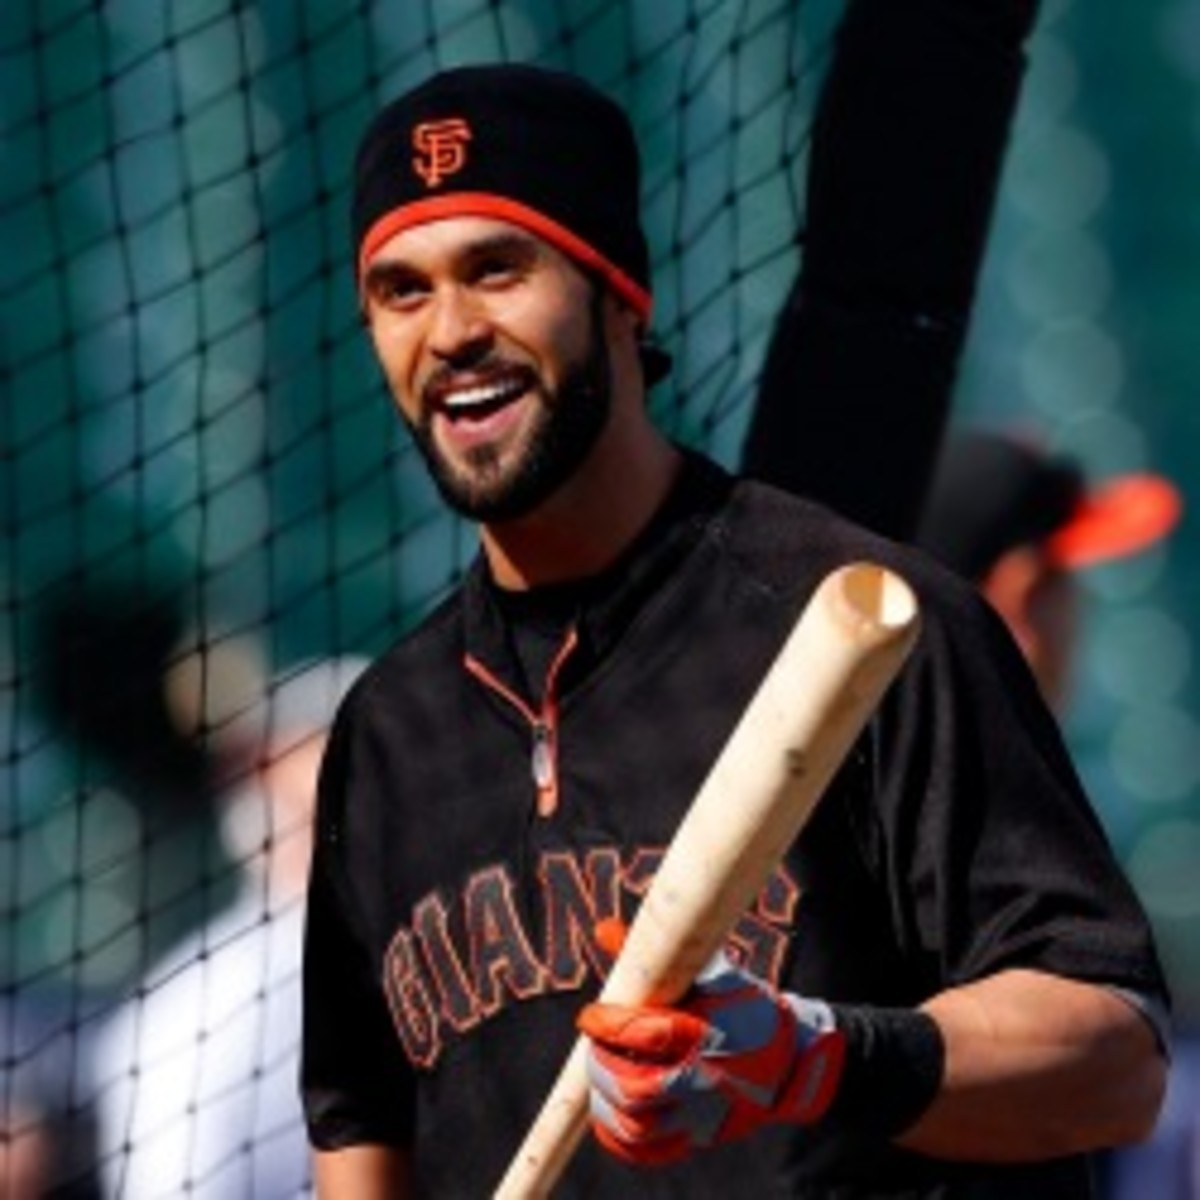 Giants outfielder Angel Pagan gets a new 4-year, $40 million deal with the club. (Jason O. Watson/Getty Images)